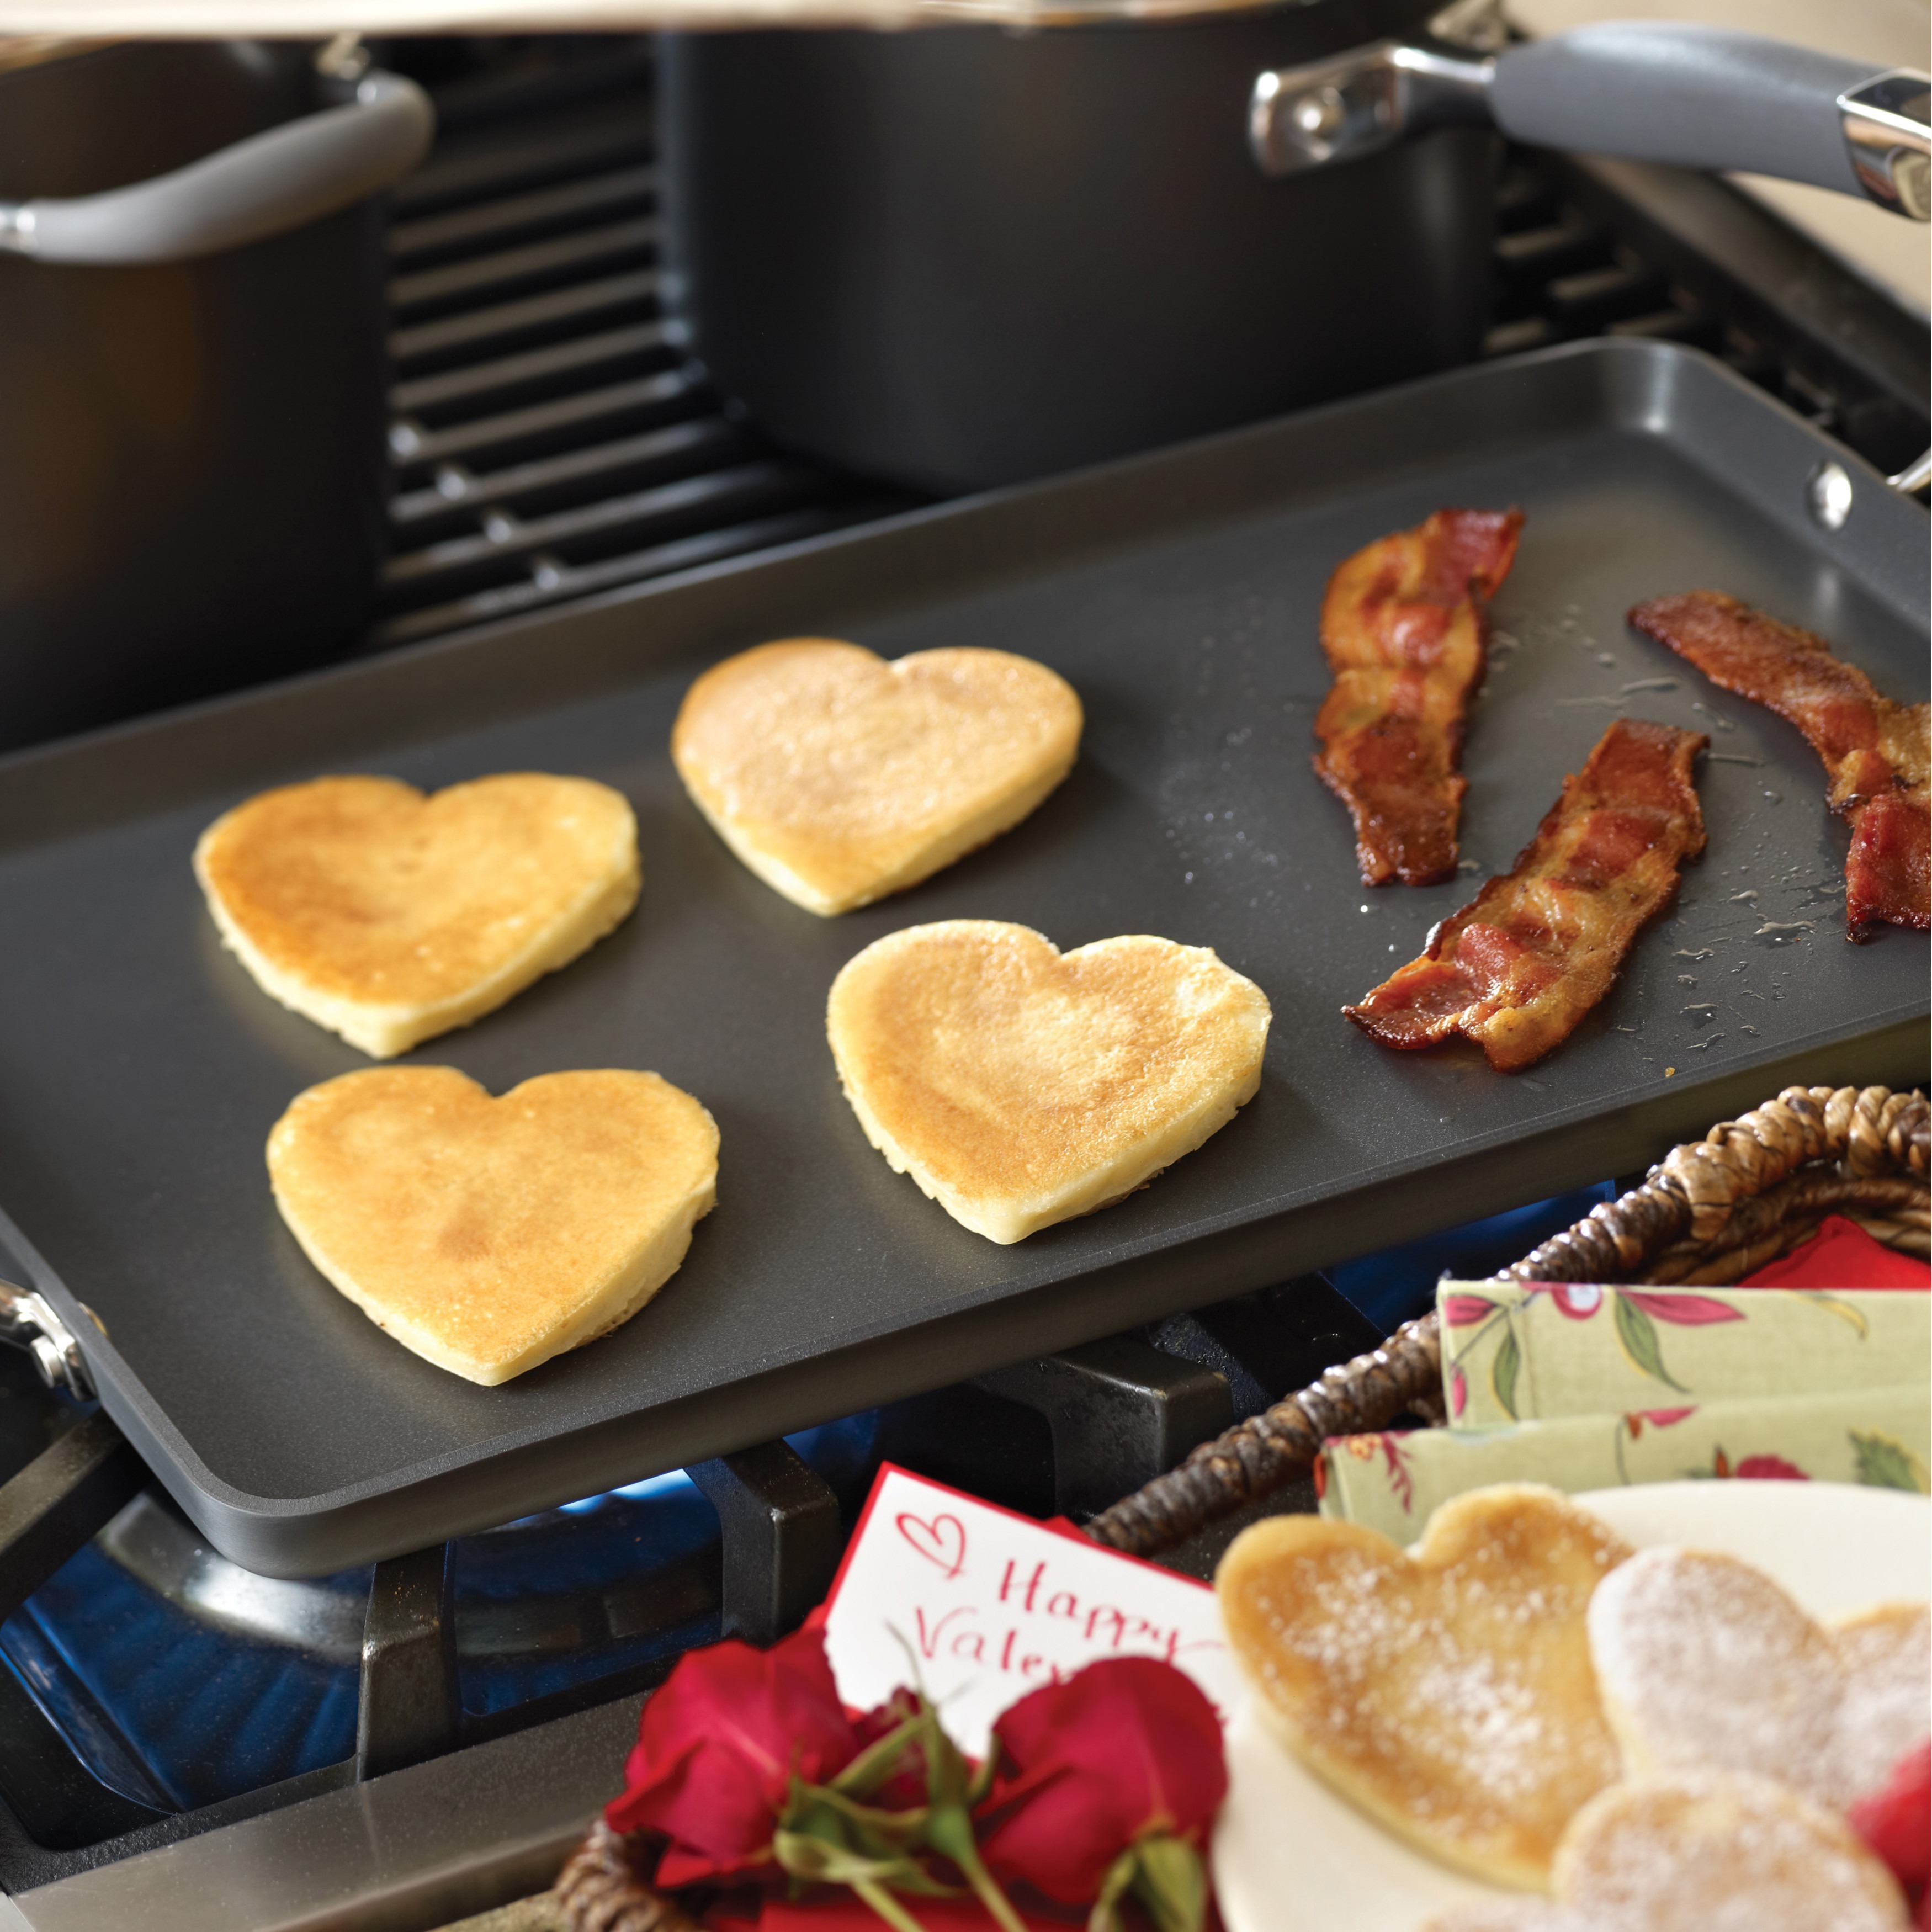 Anolon Advanced 18x10 inch Double Burner Griddle Today $59.99